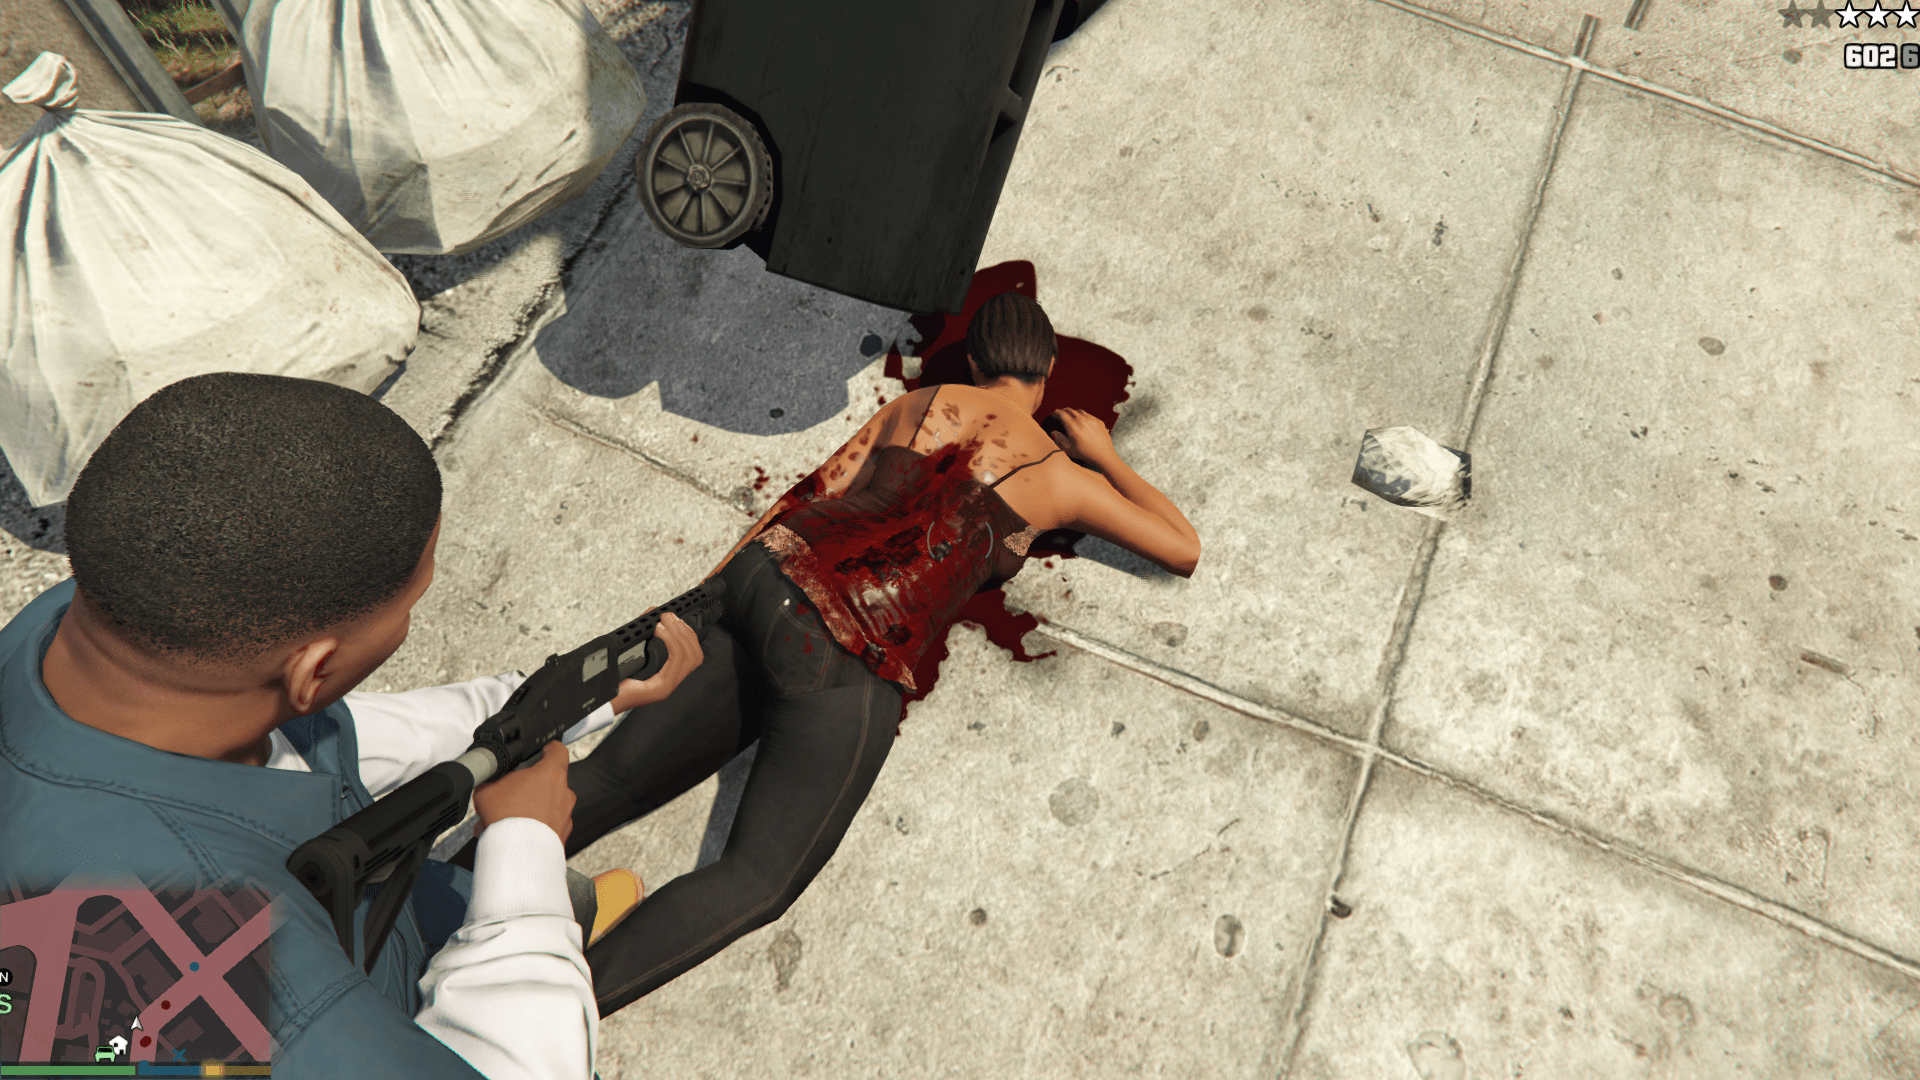 Gta 5 blood and decals фото 86